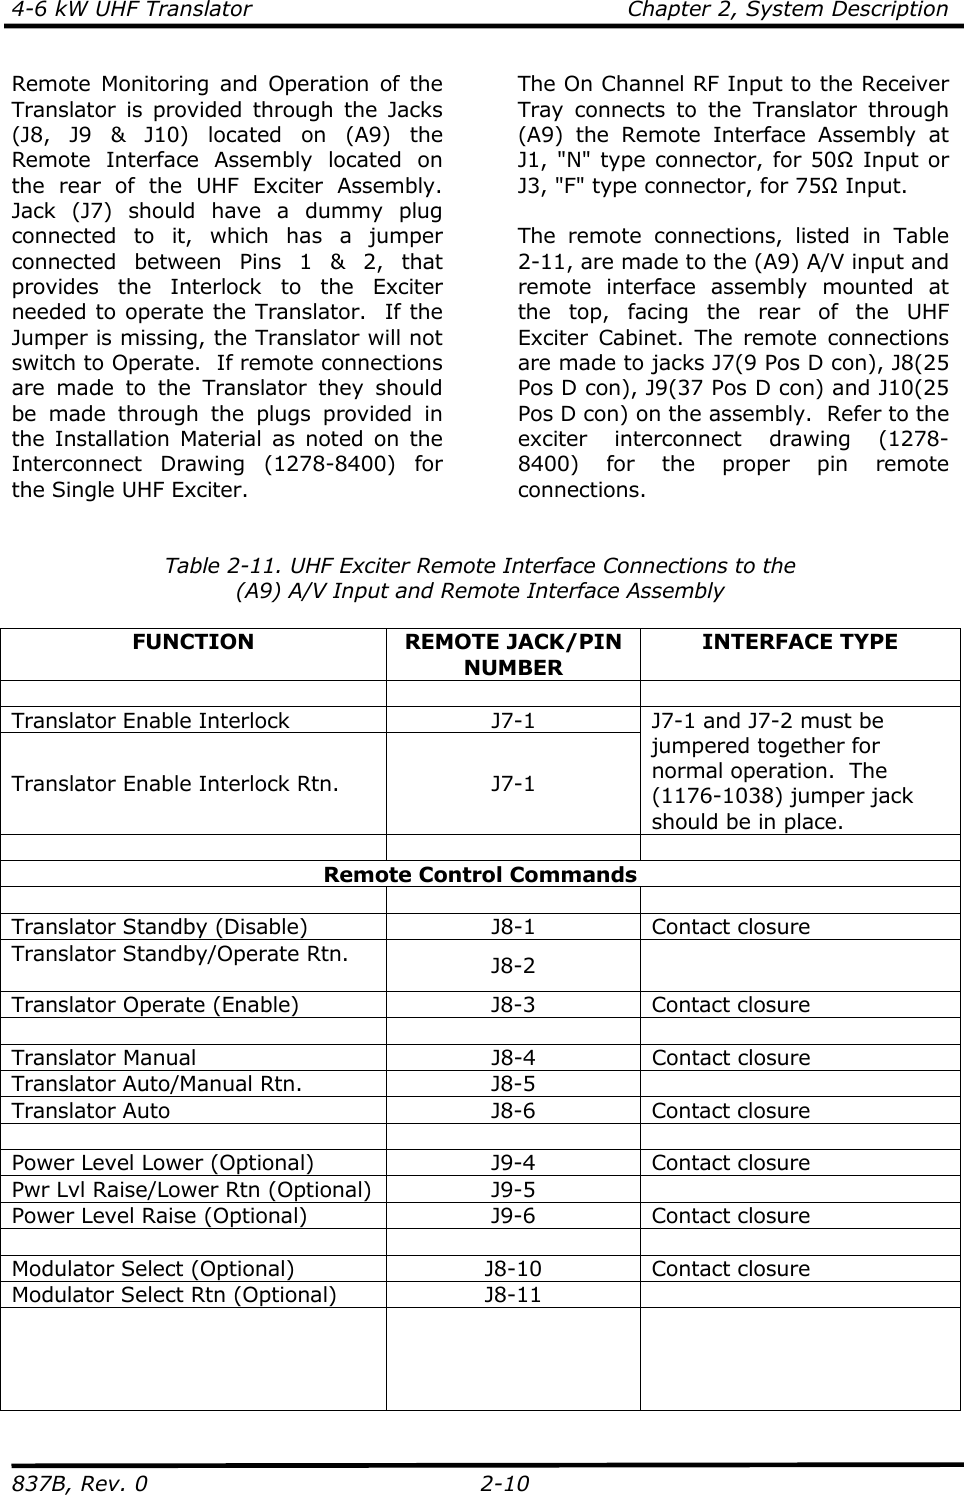 4-6 kW UHF Translator    Chapter 2, System Description 837B, Rev. 0  2-10 Remote Monitoring and Operation of the Translator is provided through the Jacks (J8, J9 &amp; J10) located on (A9) the Remote Interface Assembly located on the rear of the UHF Exciter Assembly.  Jack (J7) should have a dummy plug connected to it, which has a jumper connected between Pins 1 &amp; 2, that provides the Interlock to the Exciter needed to operate the Translator.  If the Jumper is missing, the Translator will not switch to Operate.  If remote connections are made to the Translator they should be made through the plugs provided in the Installation Material as noted on the Interconnect Drawing (1278-8400) for the Single UHF Exciter.  The On Channel RF Input to the Receiver Tray connects to the Translator through (A9) the Remote Interface Assembly at J1, &quot;N&quot; type connector, for 50Ω Input or J3, &quot;F&quot; type connector, for 75Ω Input.  The remote connections, listed in Table 2-11, are made to the (A9) A/V input and remote interface assembly mounted at the top, facing the rear of the UHF Exciter Cabinet. The remote connections are made to jacks J7(9 Pos D con), J8(25 Pos D con), J9(37 Pos D con) and J10(25 Pos D con) on the assembly.  Refer to the exciter interconnect drawing (1278-8400) for the proper pin remote connections.  Table 2-11. UHF Exciter Remote Interface Connections to the (A9) A/V Input and Remote Interface Assembly  FUNCTION REMOTE JACK/PIN NUMBER INTERFACE TYPE    Translator Enable Interlock  J7-1 Translator Enable Interlock Rtn.  J7-1 J7-1 and J7-2 must be jumpered together for normal operation.  The (1176-1038) jumper jack  should be in place.    Remote Control Commands    Translator Standby (Disable)  J8-1  Contact closure Translator Standby/Operate Rtn.  J8-2  Translator Operate (Enable)  J8-3  Contact closure    Translator Manual  J8-4  Contact closure Translator Auto/Manual Rtn.  J8-5   Translator Auto  J8-6  Contact closure    Power Level Lower (Optional) J9-4 Contact closure Pwr Lvl Raise/Lower Rtn (Optional)  J9-5   Power Level Raise (Optional) J9-6 Contact closure    Modulator Select (Optional)  J8-10  Contact closure Modulator Select Rtn (Optional)  J8-11         